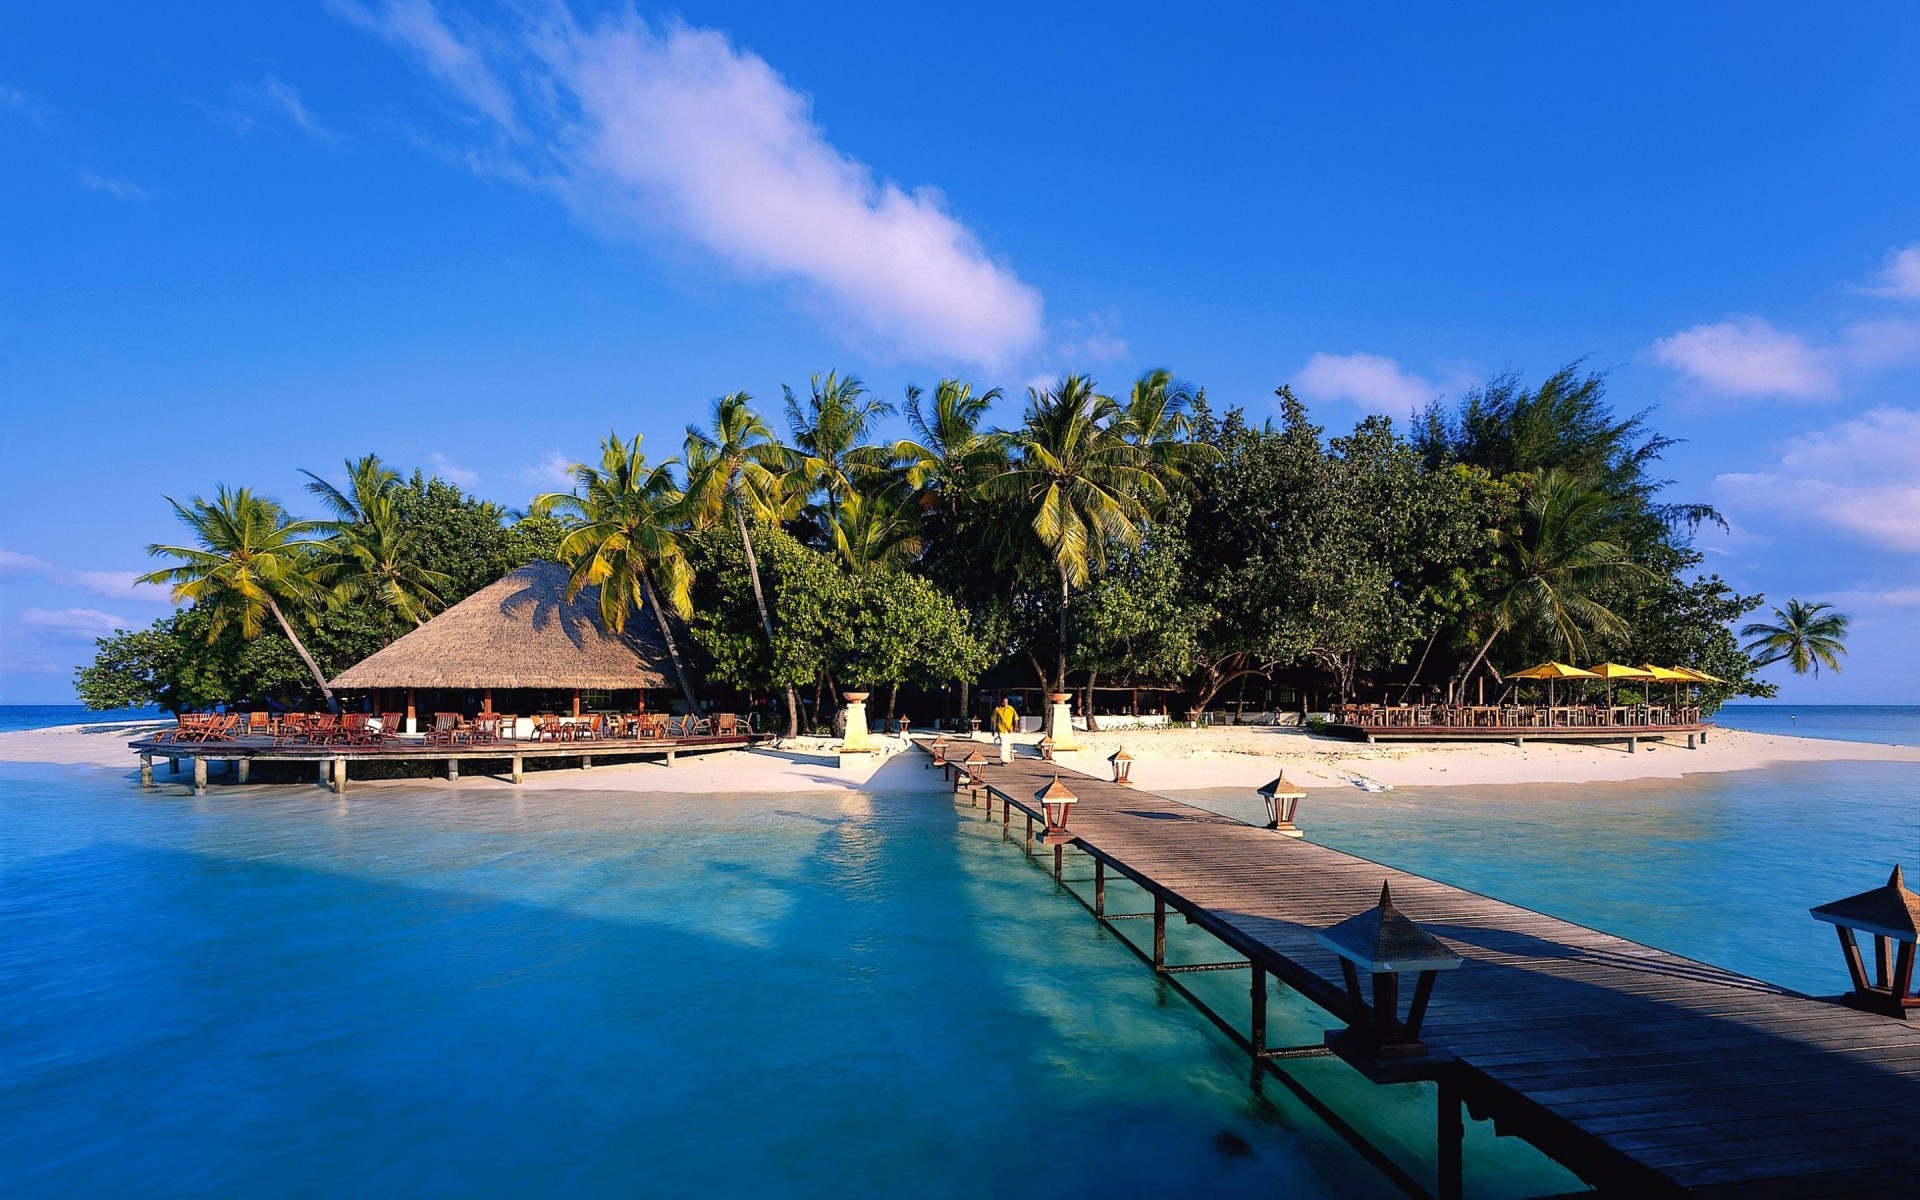 landscapes tropical resort luxury hotel exotic water swimming relaxation travel beach summer leisure swimming pool vacation idyllic palm ocean sun sand maldives trees sea bungalows island